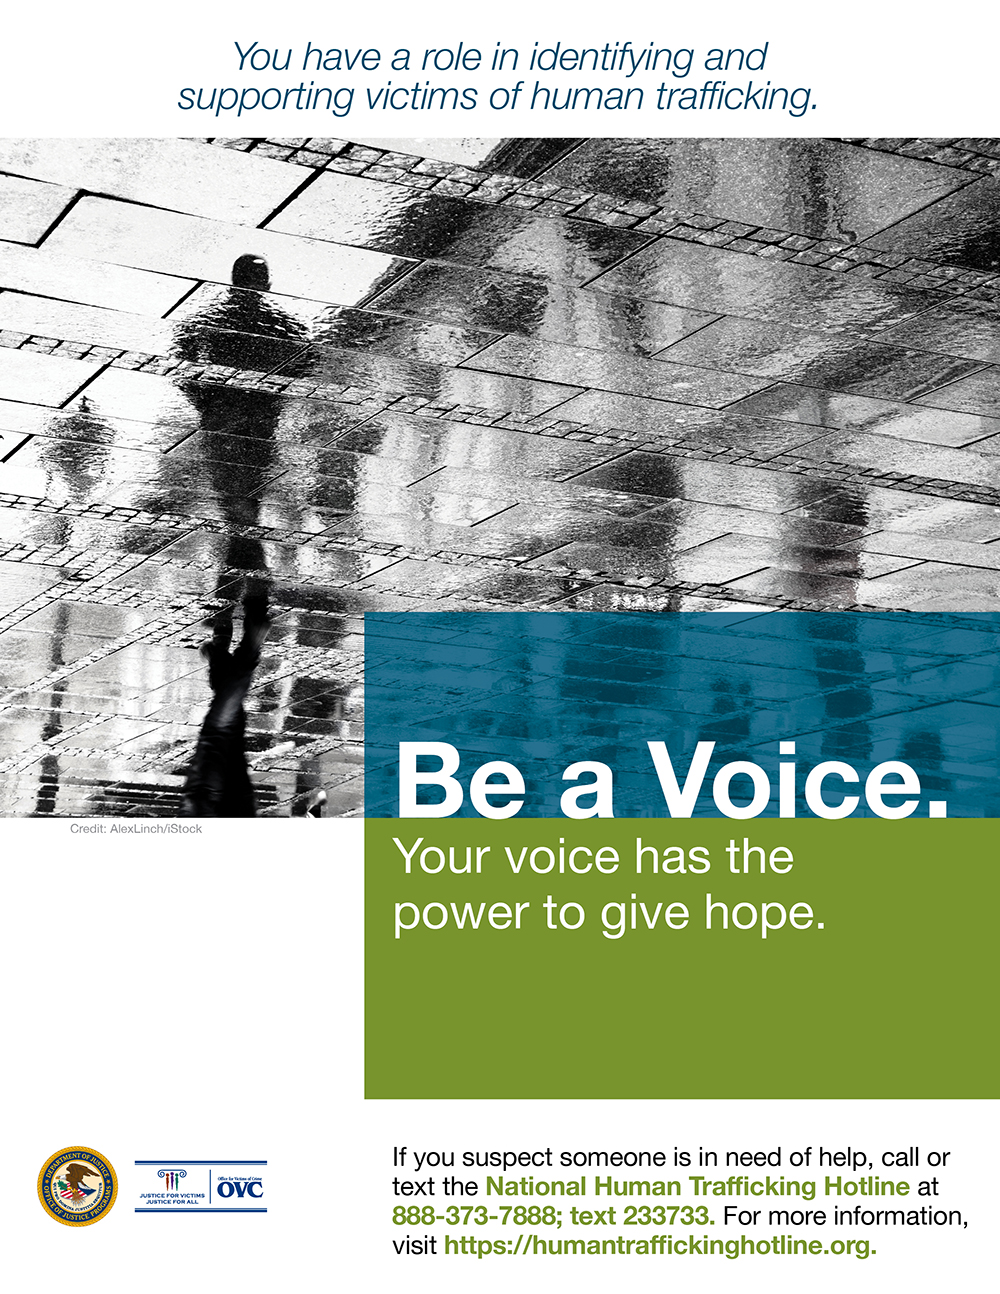 Be a Voice. Your voice has the power to give hope.